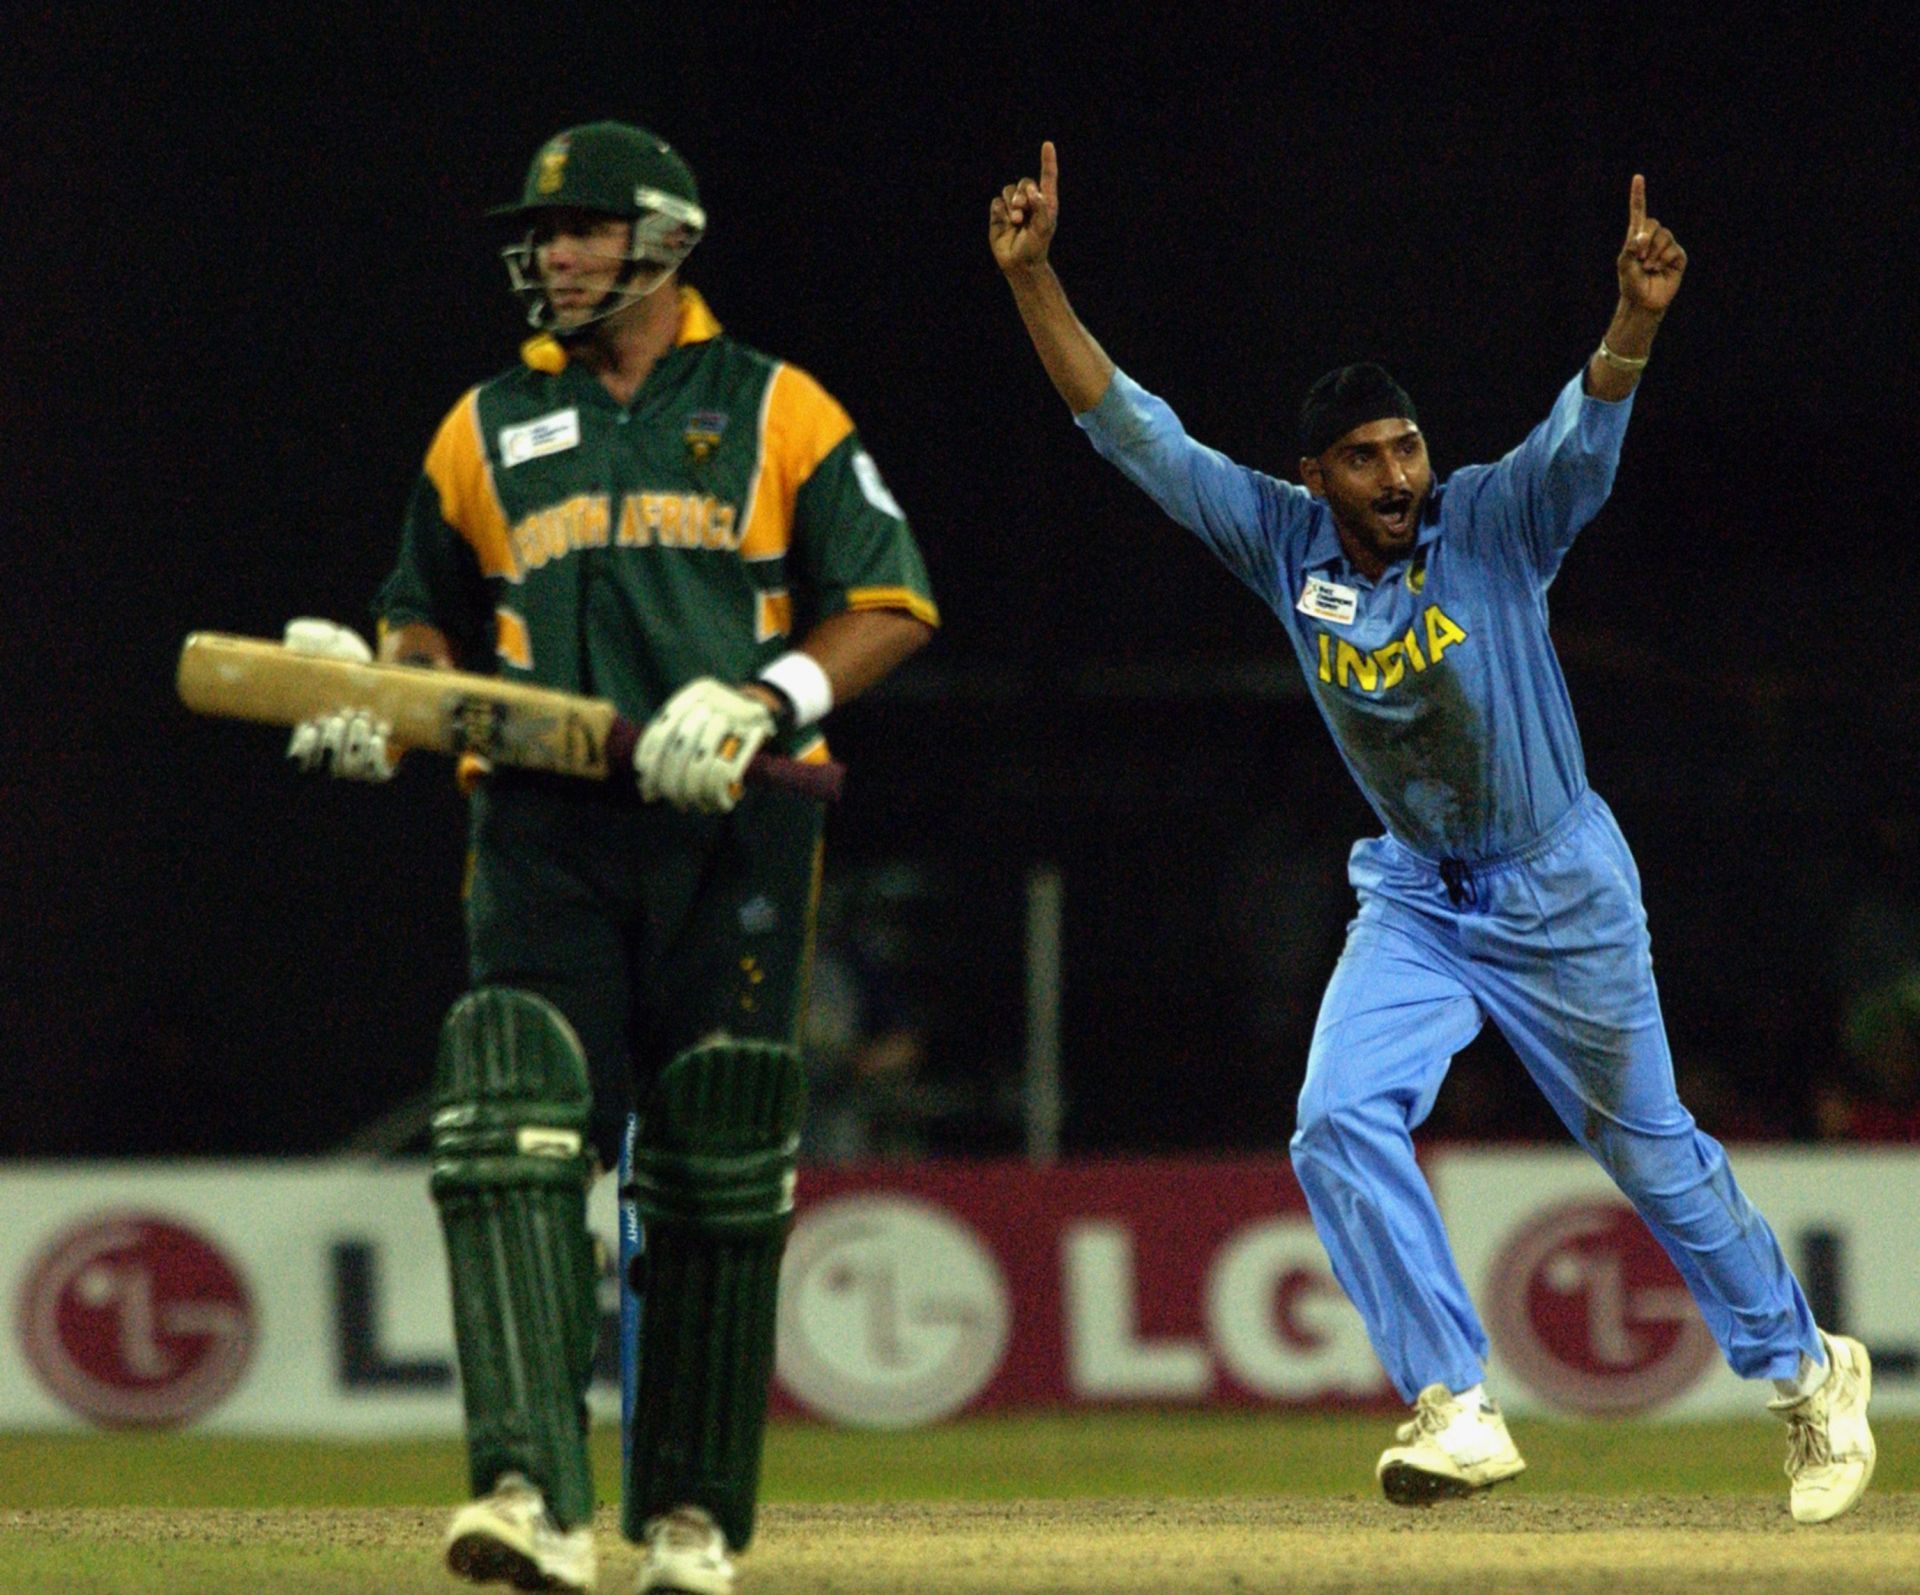 Harbhajan Singh celebrates a wicket. Pic: Getty Images